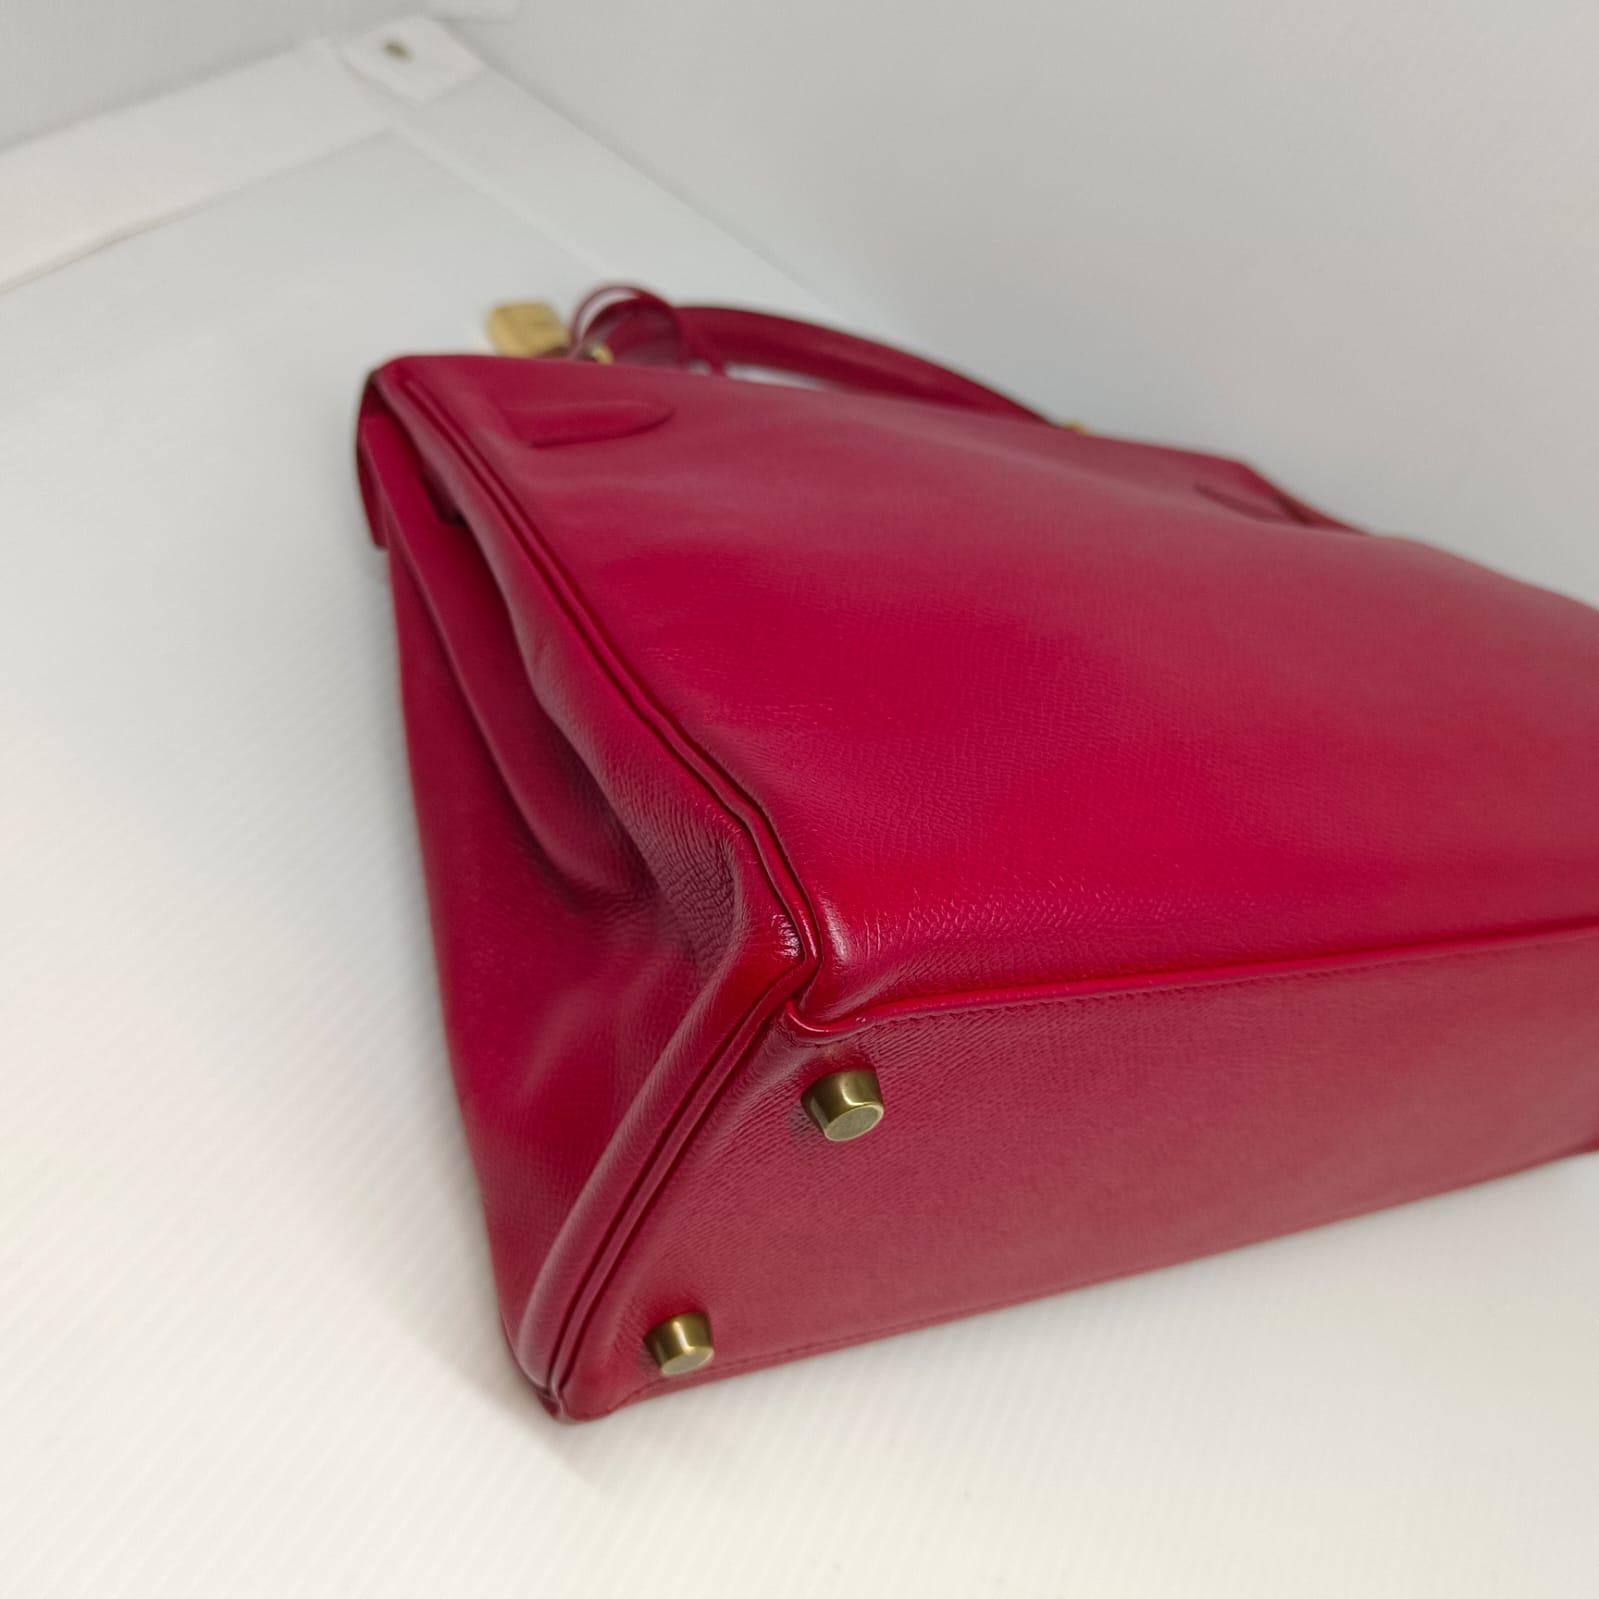 Vintage kelly 32 in rouge casaque like color with gold hardware. Lisse leather is just the vintage leather type for epsom leather. Item has slightly lose its body structure but still in very good condition overall. Minor tarnishing on the hardware.